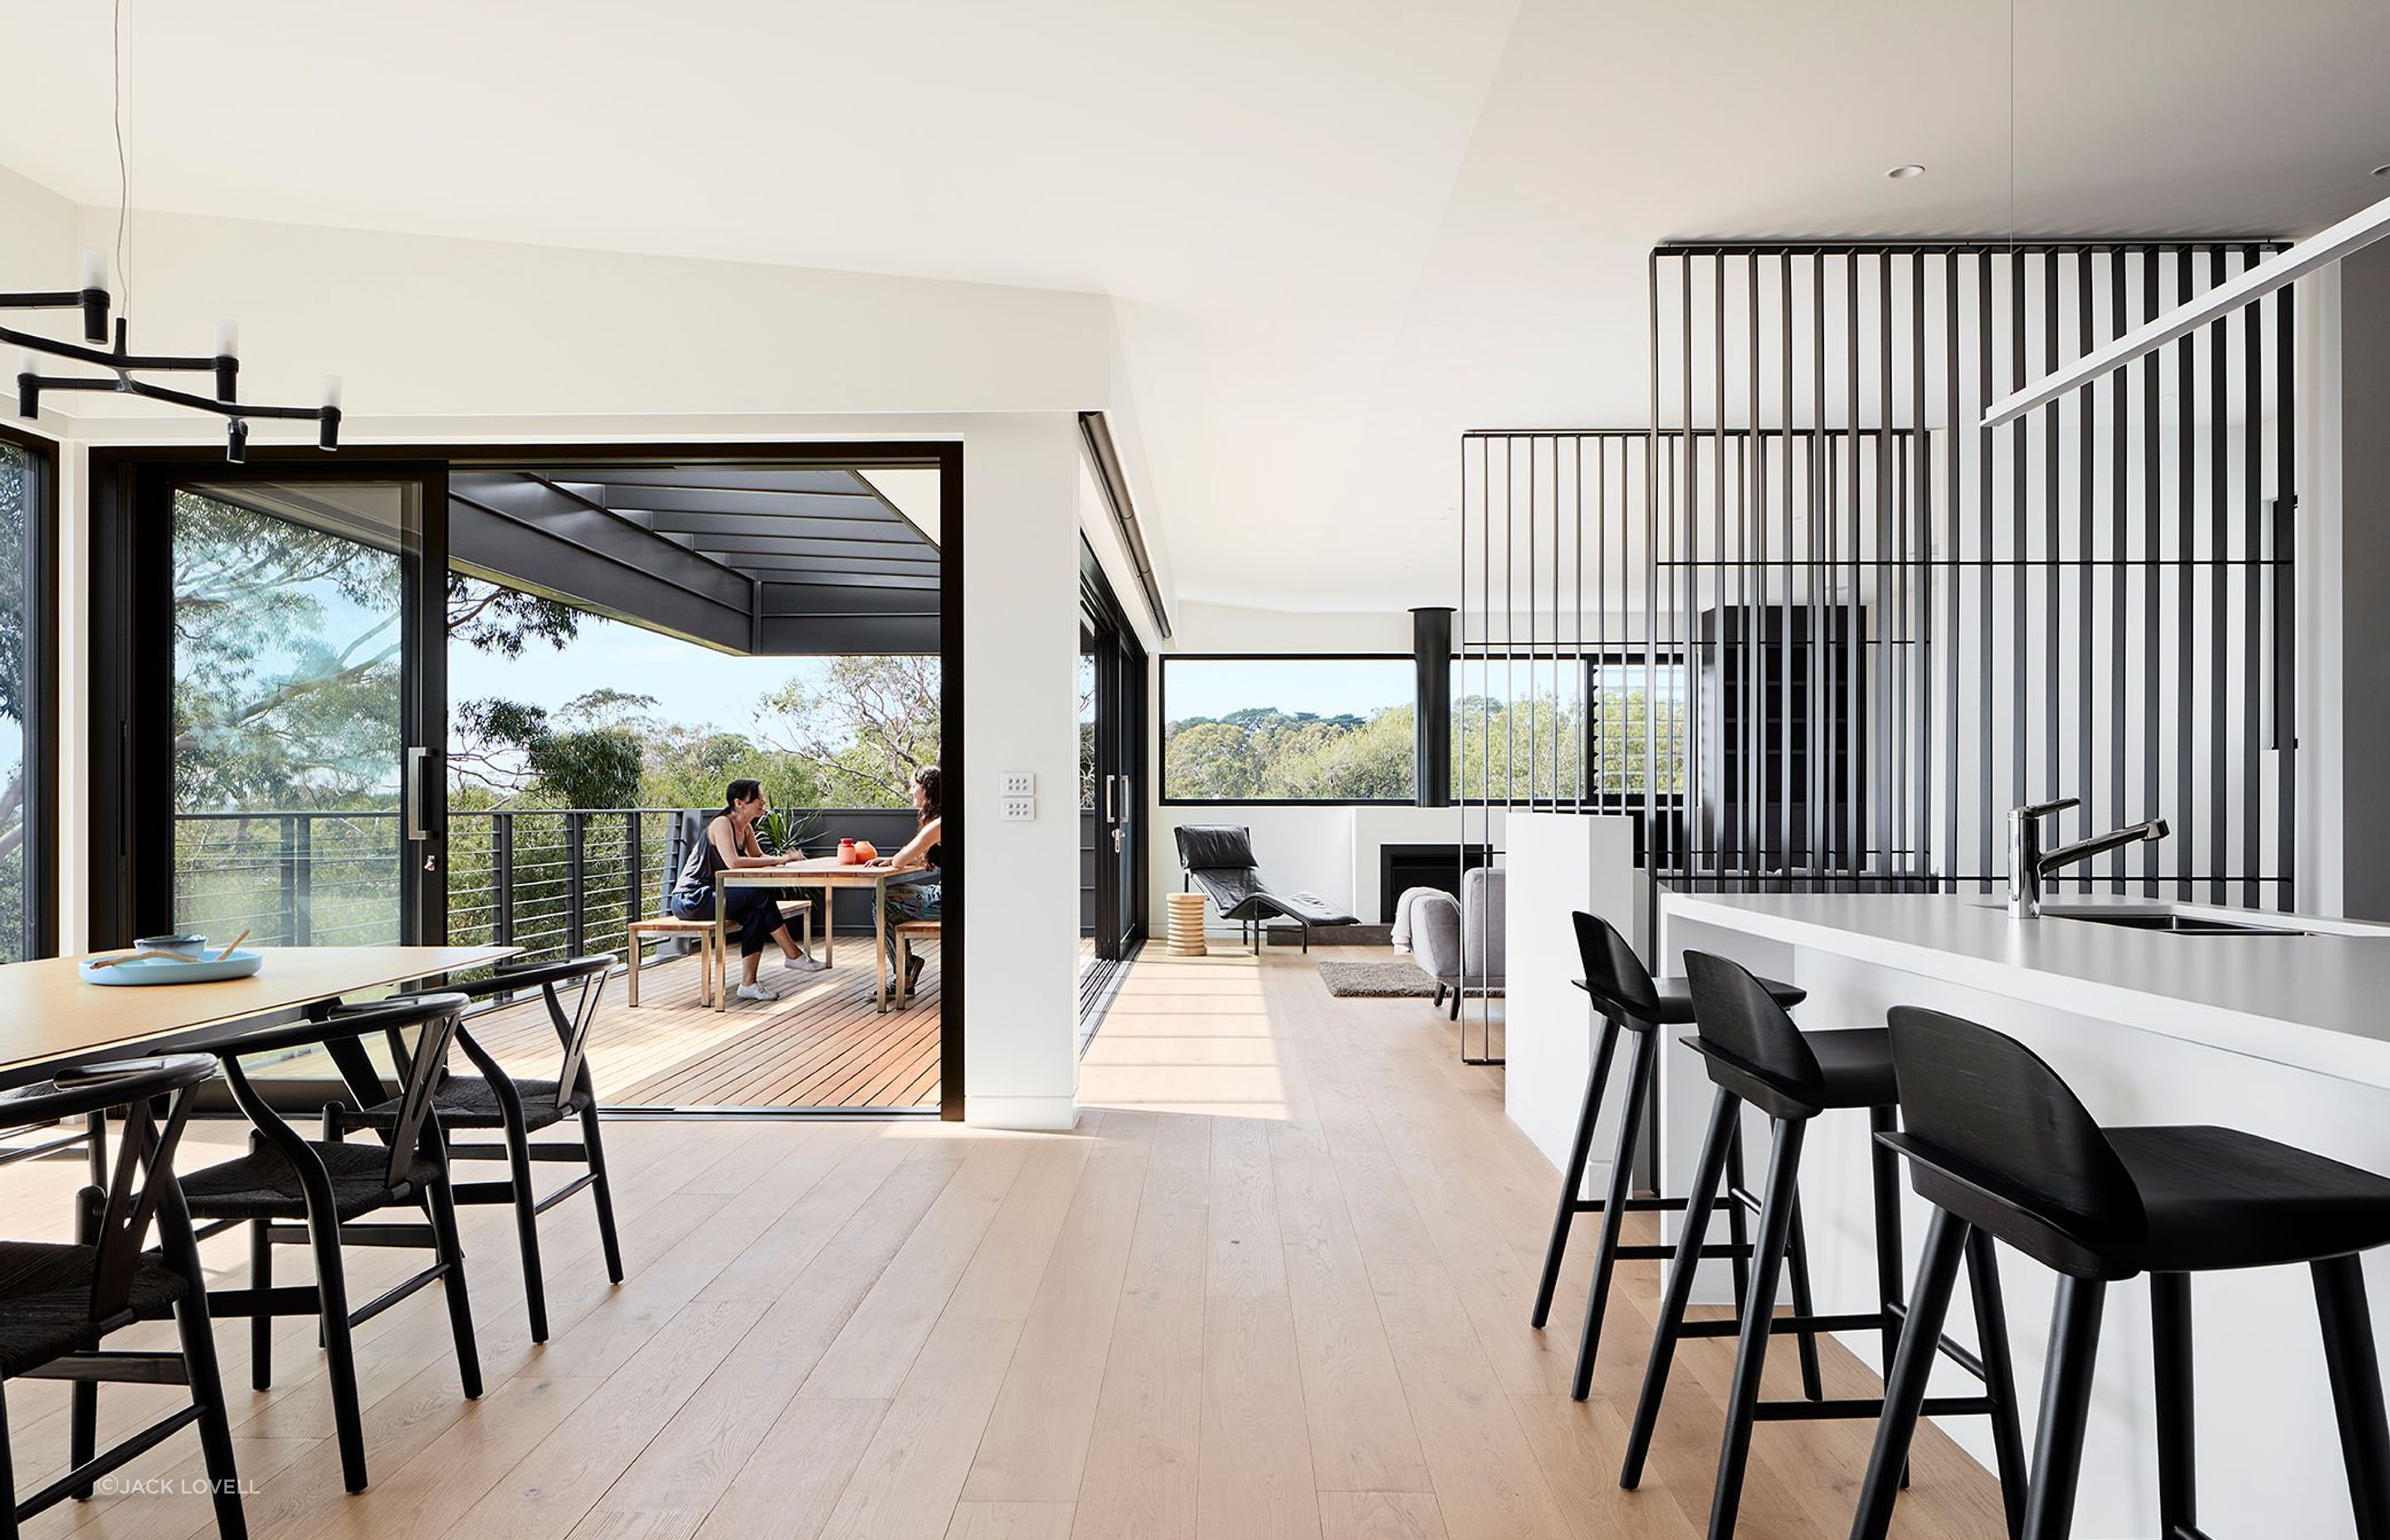 The northern outlook to sea and trees is enjoyed from the Kitchen across the dining area, and most importantly from a large entertaining deck – connecting completely with the client’s original brief.